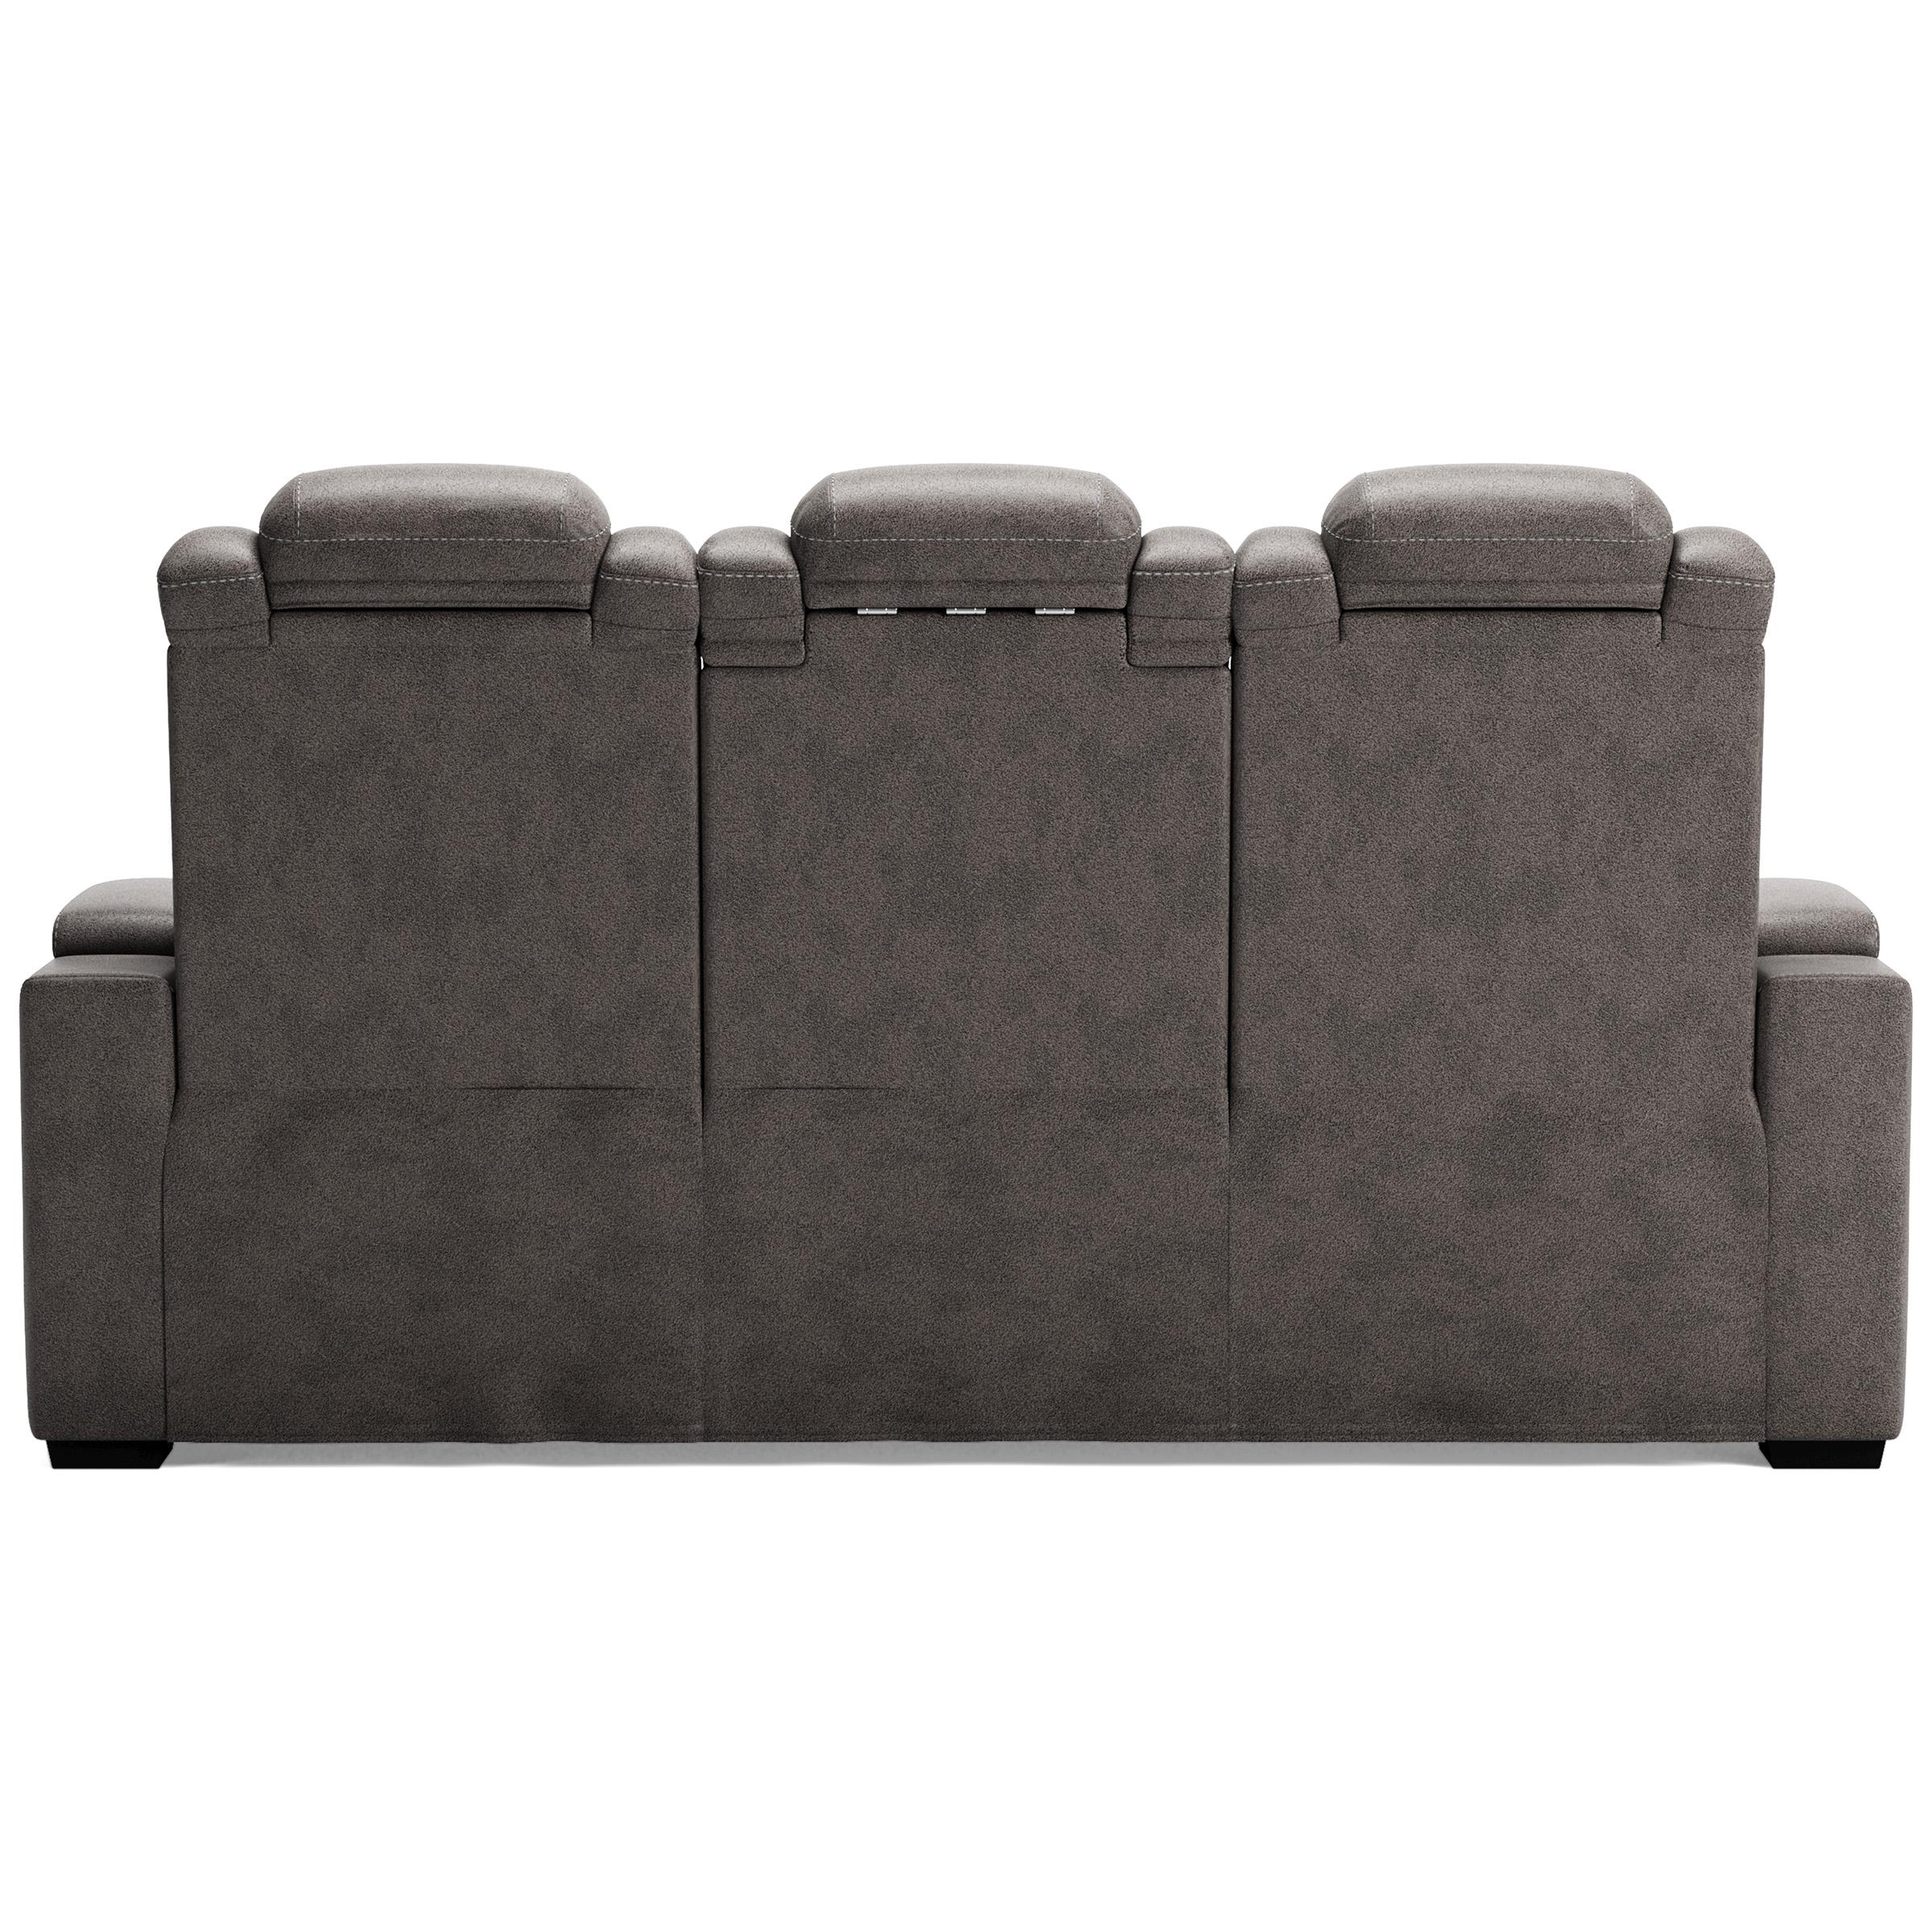 Signature Design by Ashley HyllMont Power Reclining Leather Look Sofa 9300315